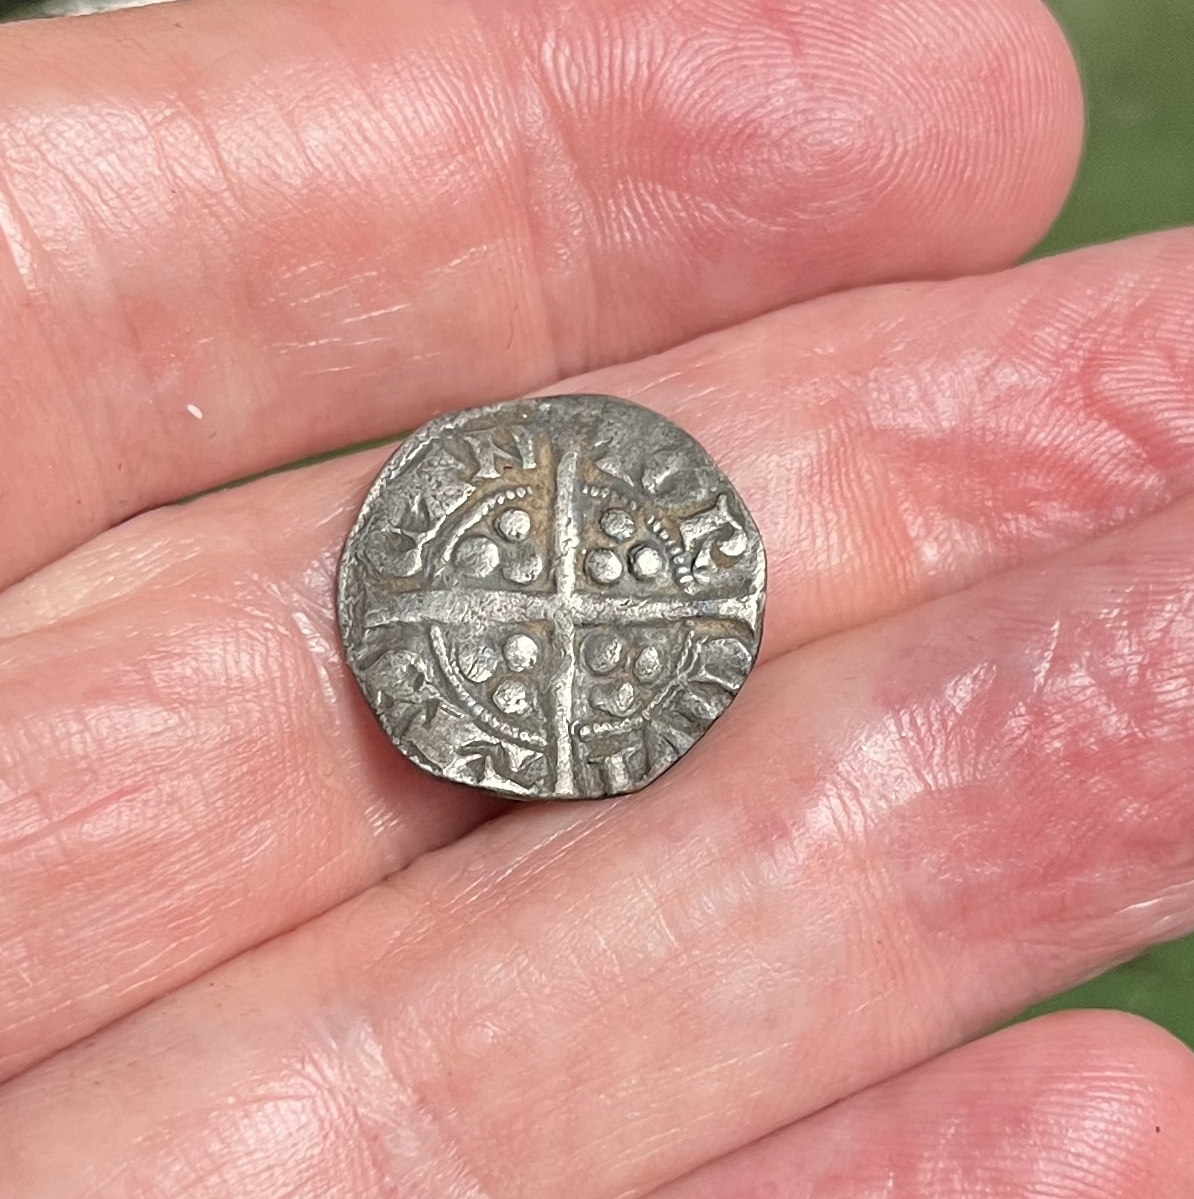 After the Storm: A 700-Year-Old Medieval Hammered Silver Coin Emerges from Rain-Soaked Soil